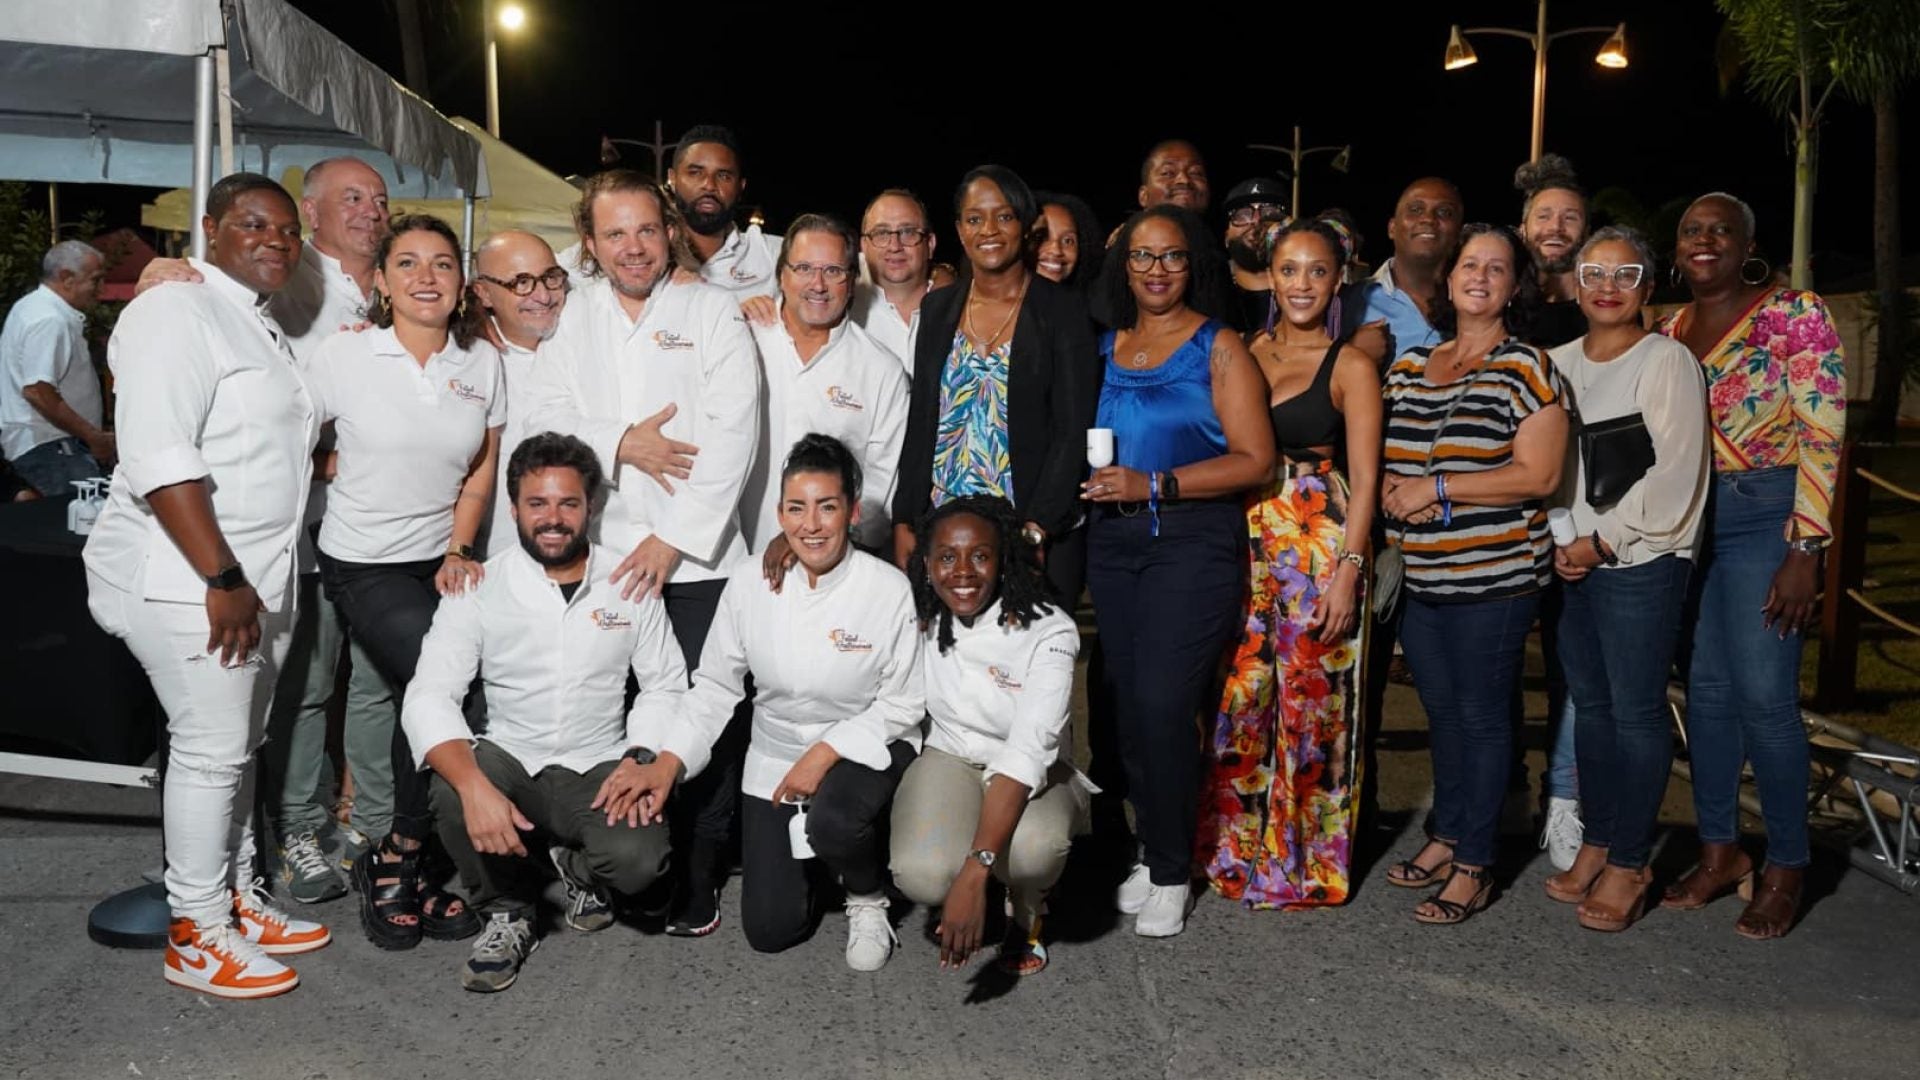 This Food Festival Is Taking Over The Caribbean. Meet The Black Chefs Showcasing Their Skills And Connecting Communities